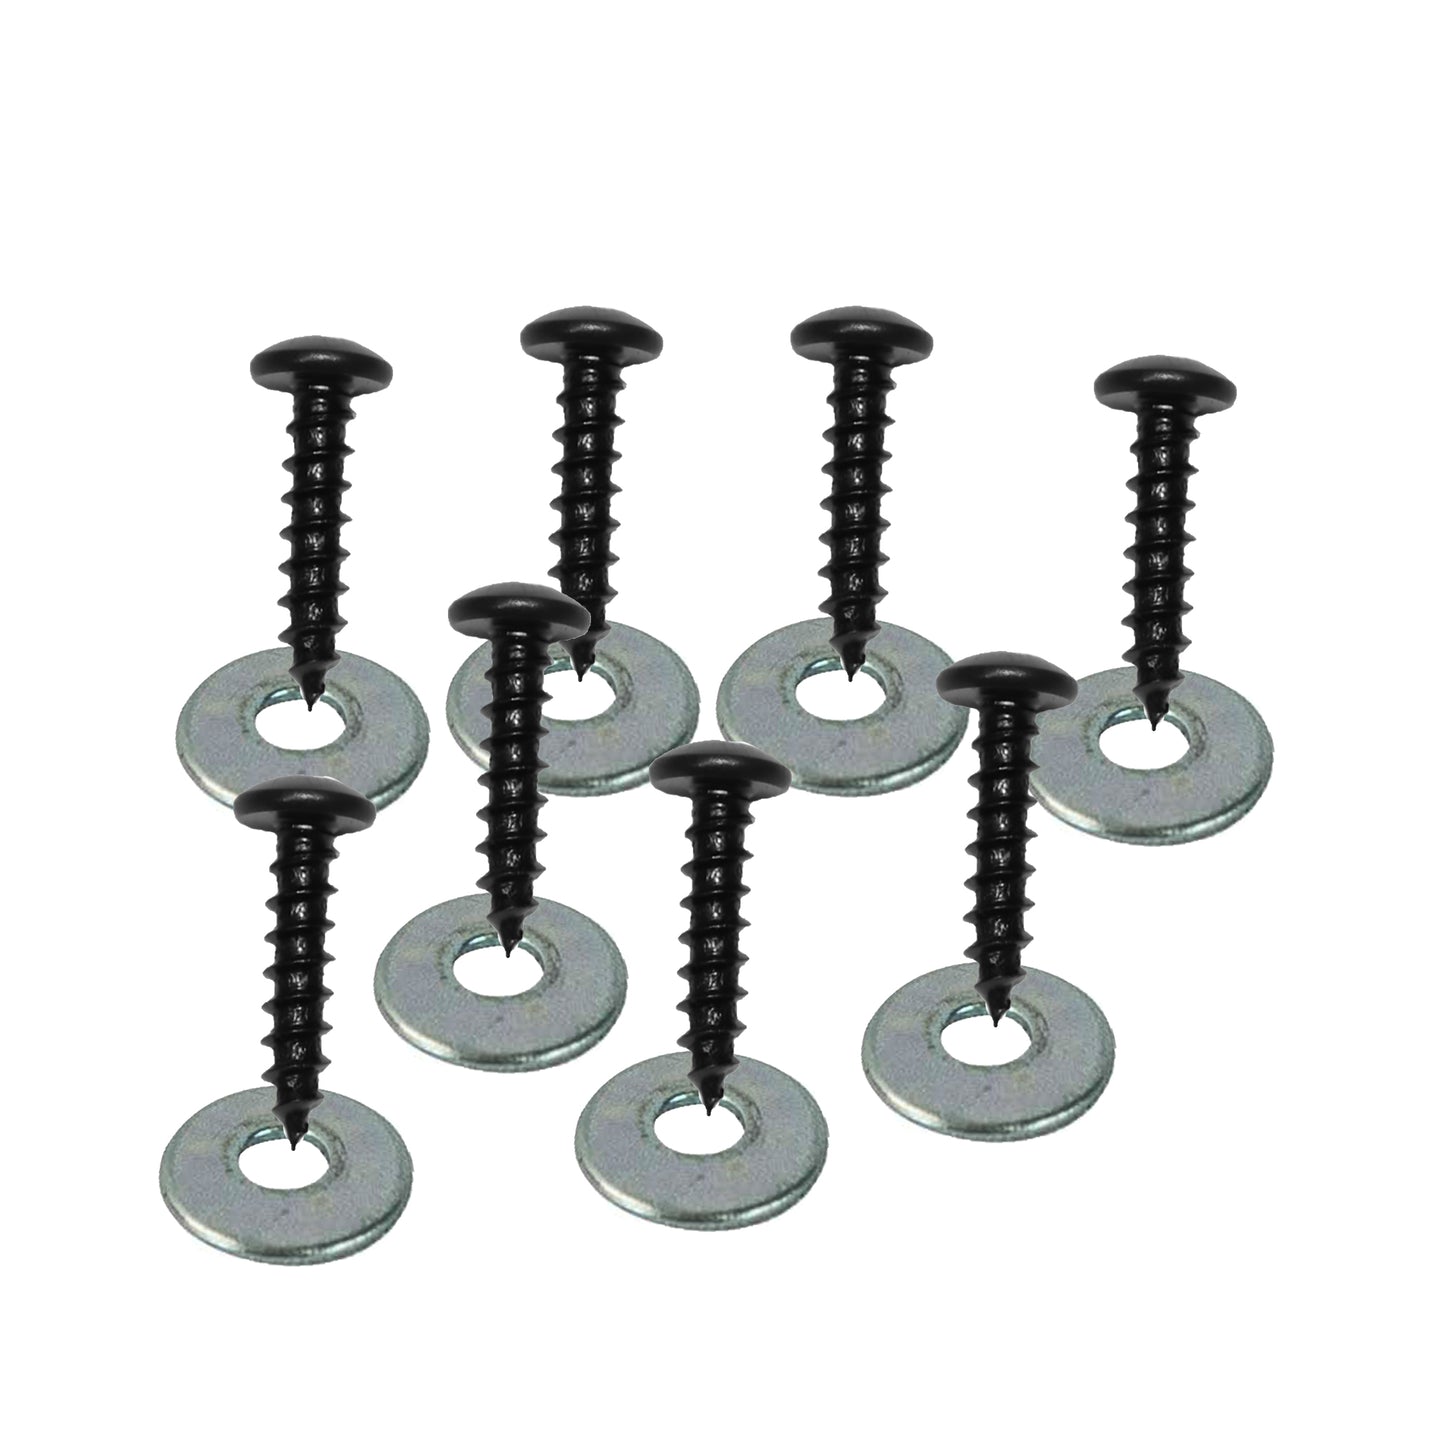 Screw for Rubber Feet for 400-Series Air Mover